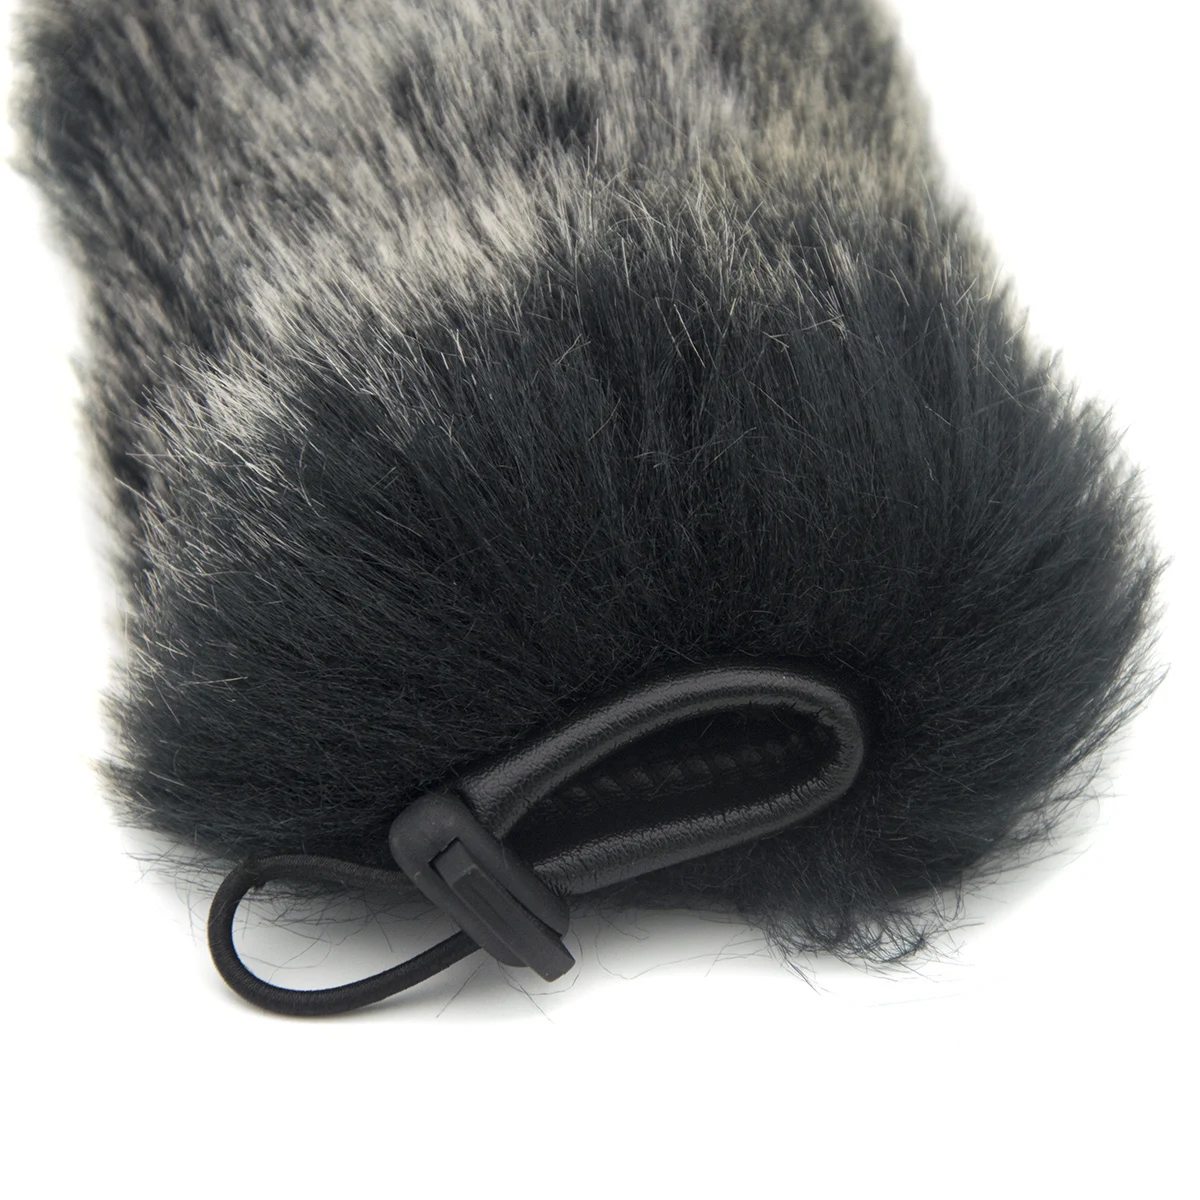 Coolvox Audio Artificial Fur Wind Shield MIC Windshield Windscreen Muff for Sony BOYA Interview Condenser Microphone 12.5cm images - 6